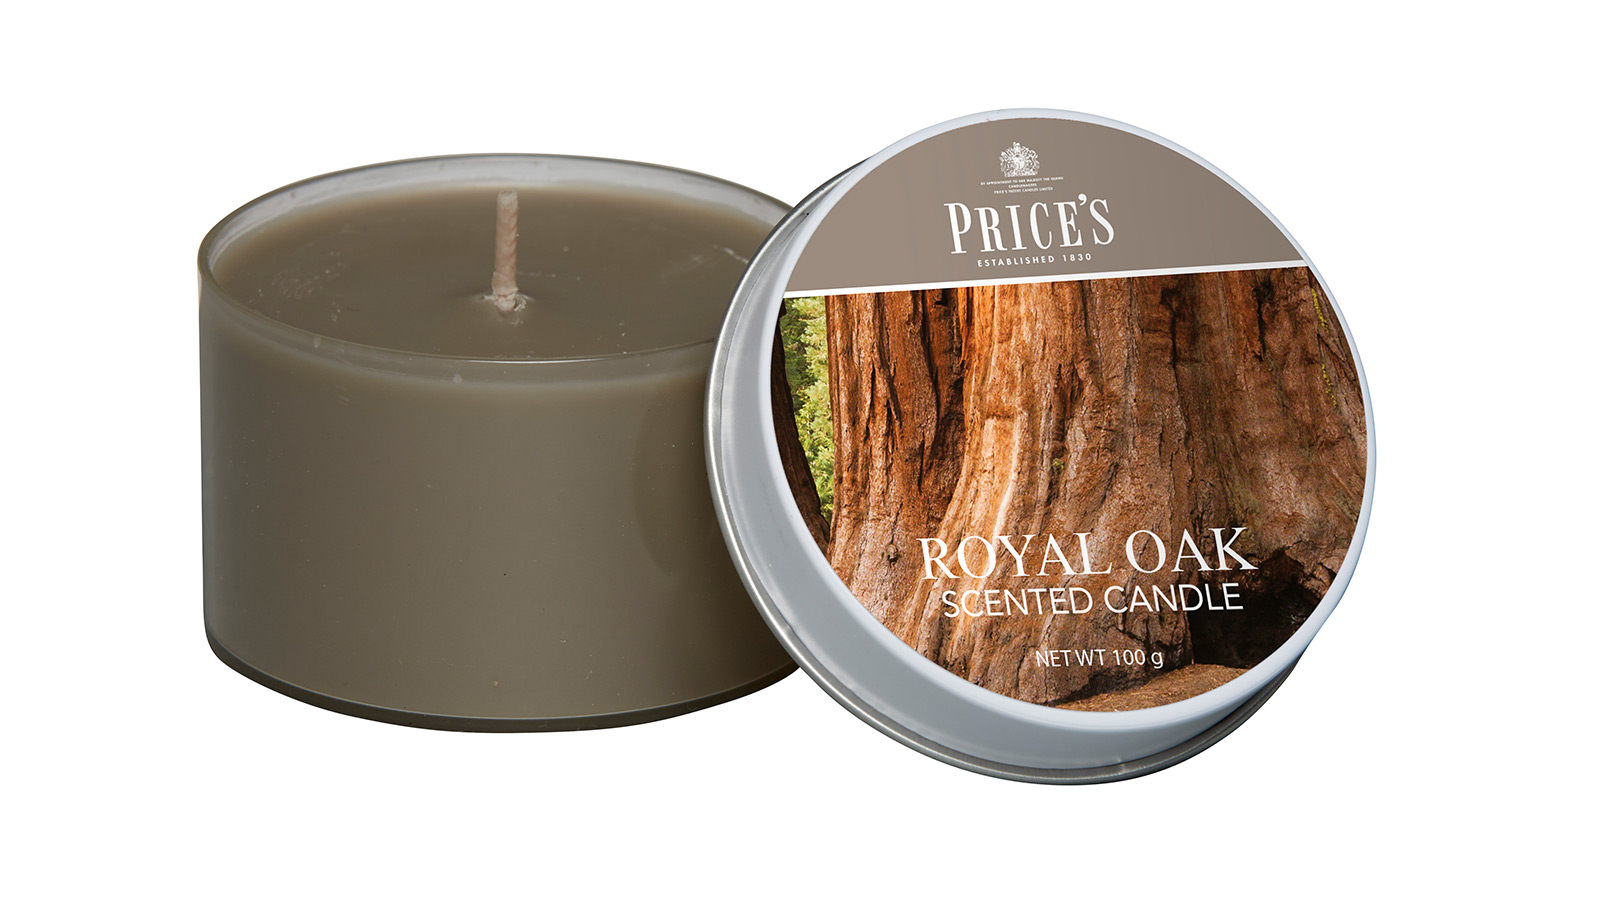 Prices Candle "Royal Oak" 100g     